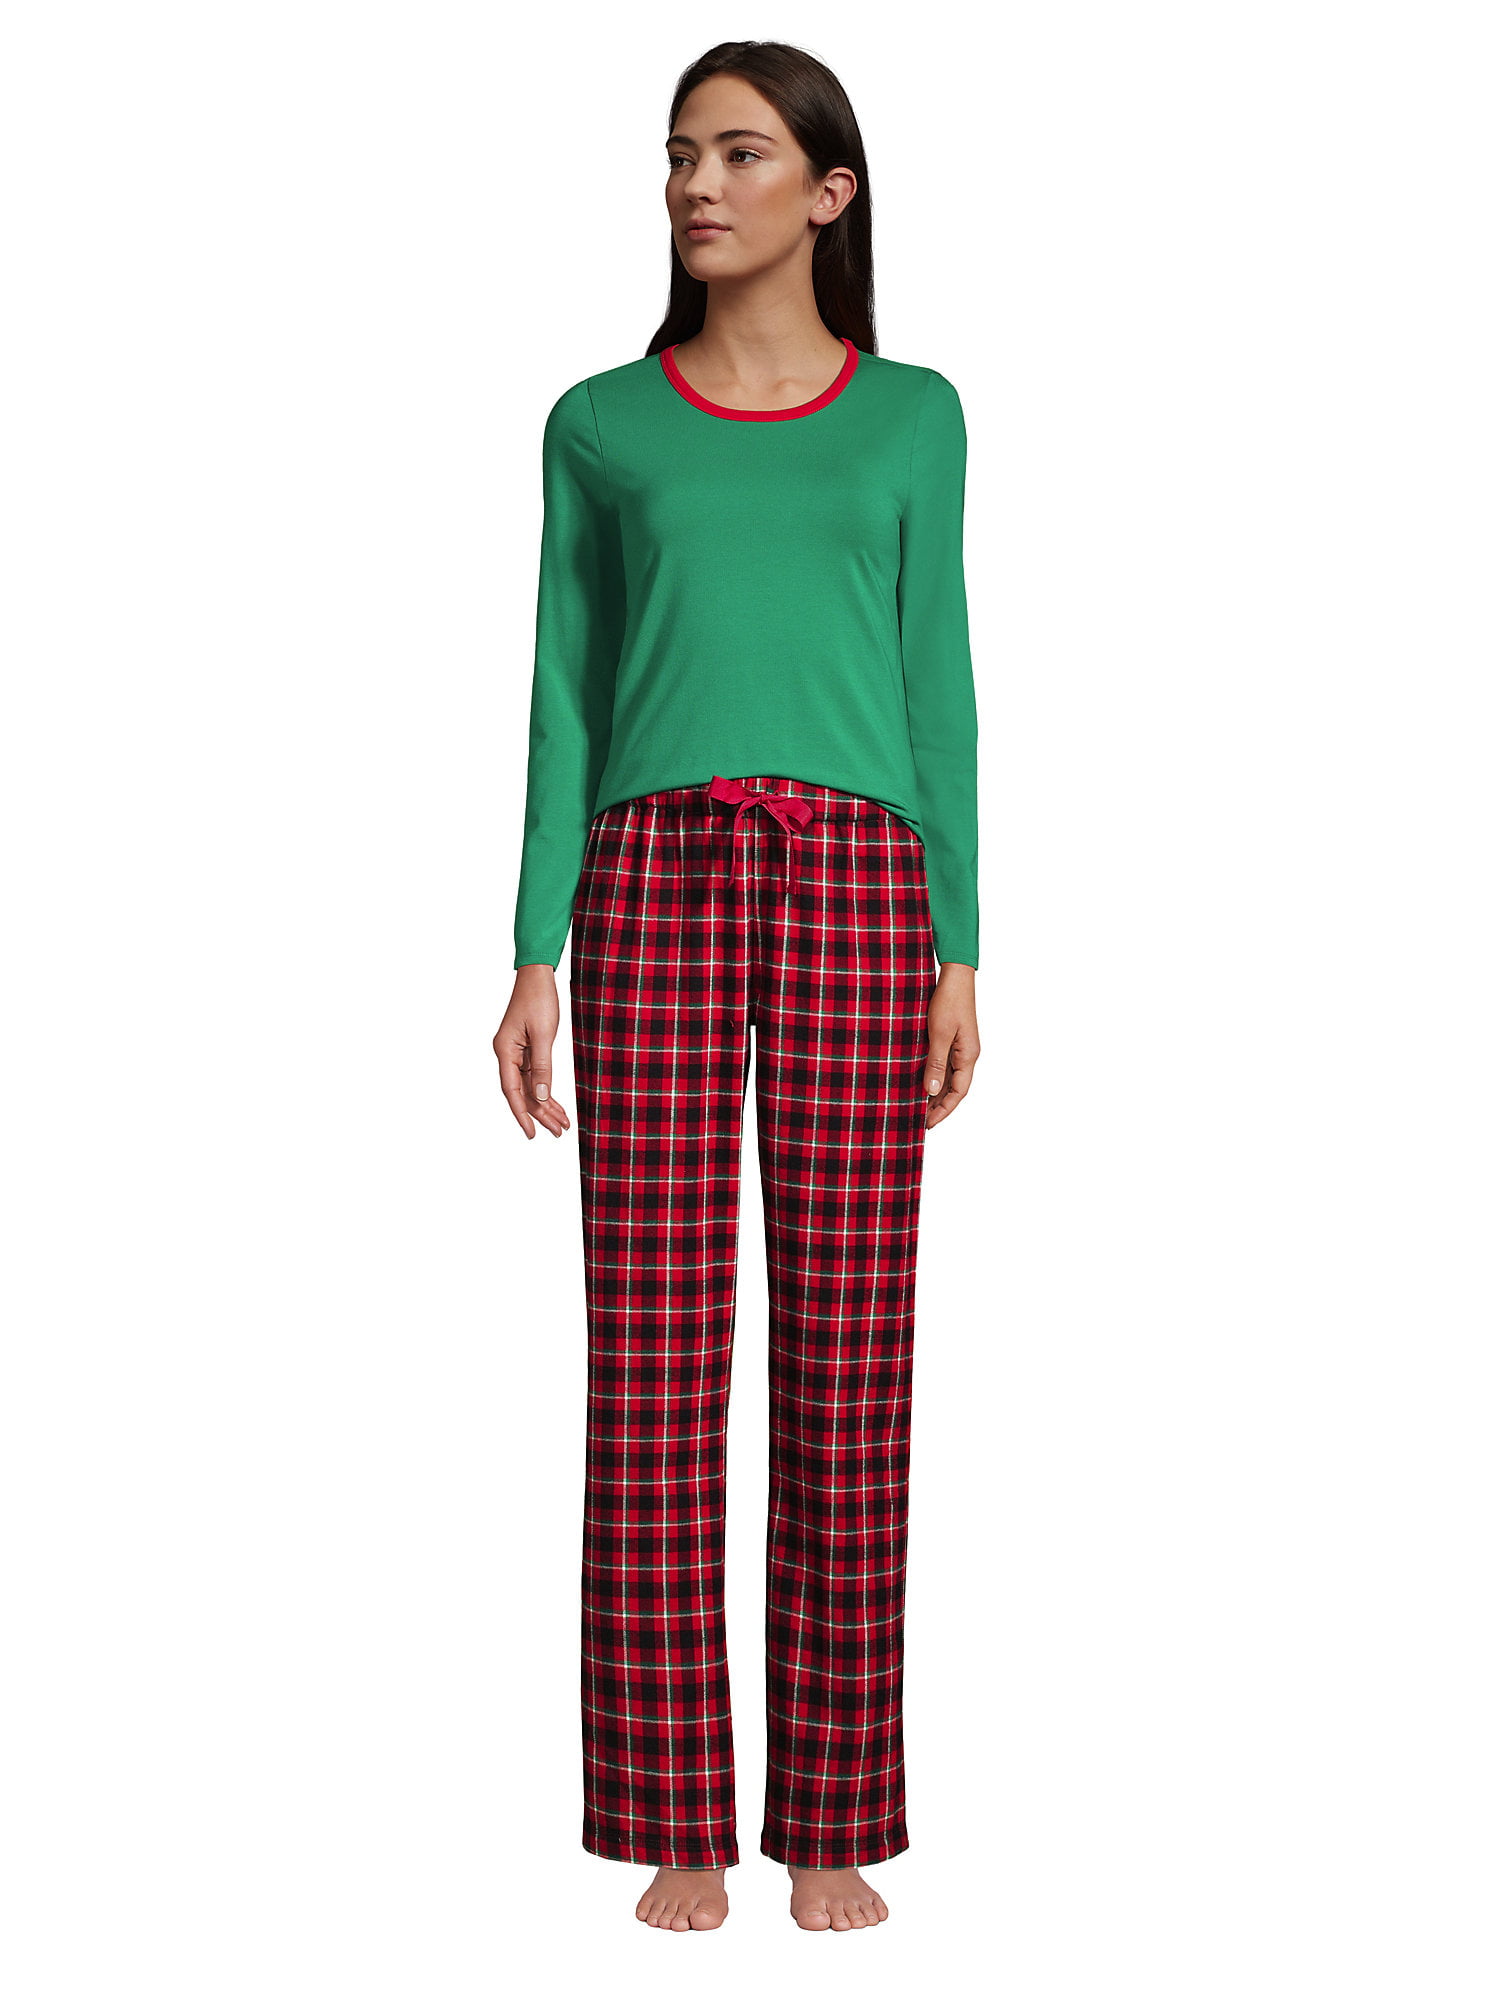 Lands' End Women's Tall Pajama Set Knit Long Sleeve T-Shirt and Flannel  Pants 